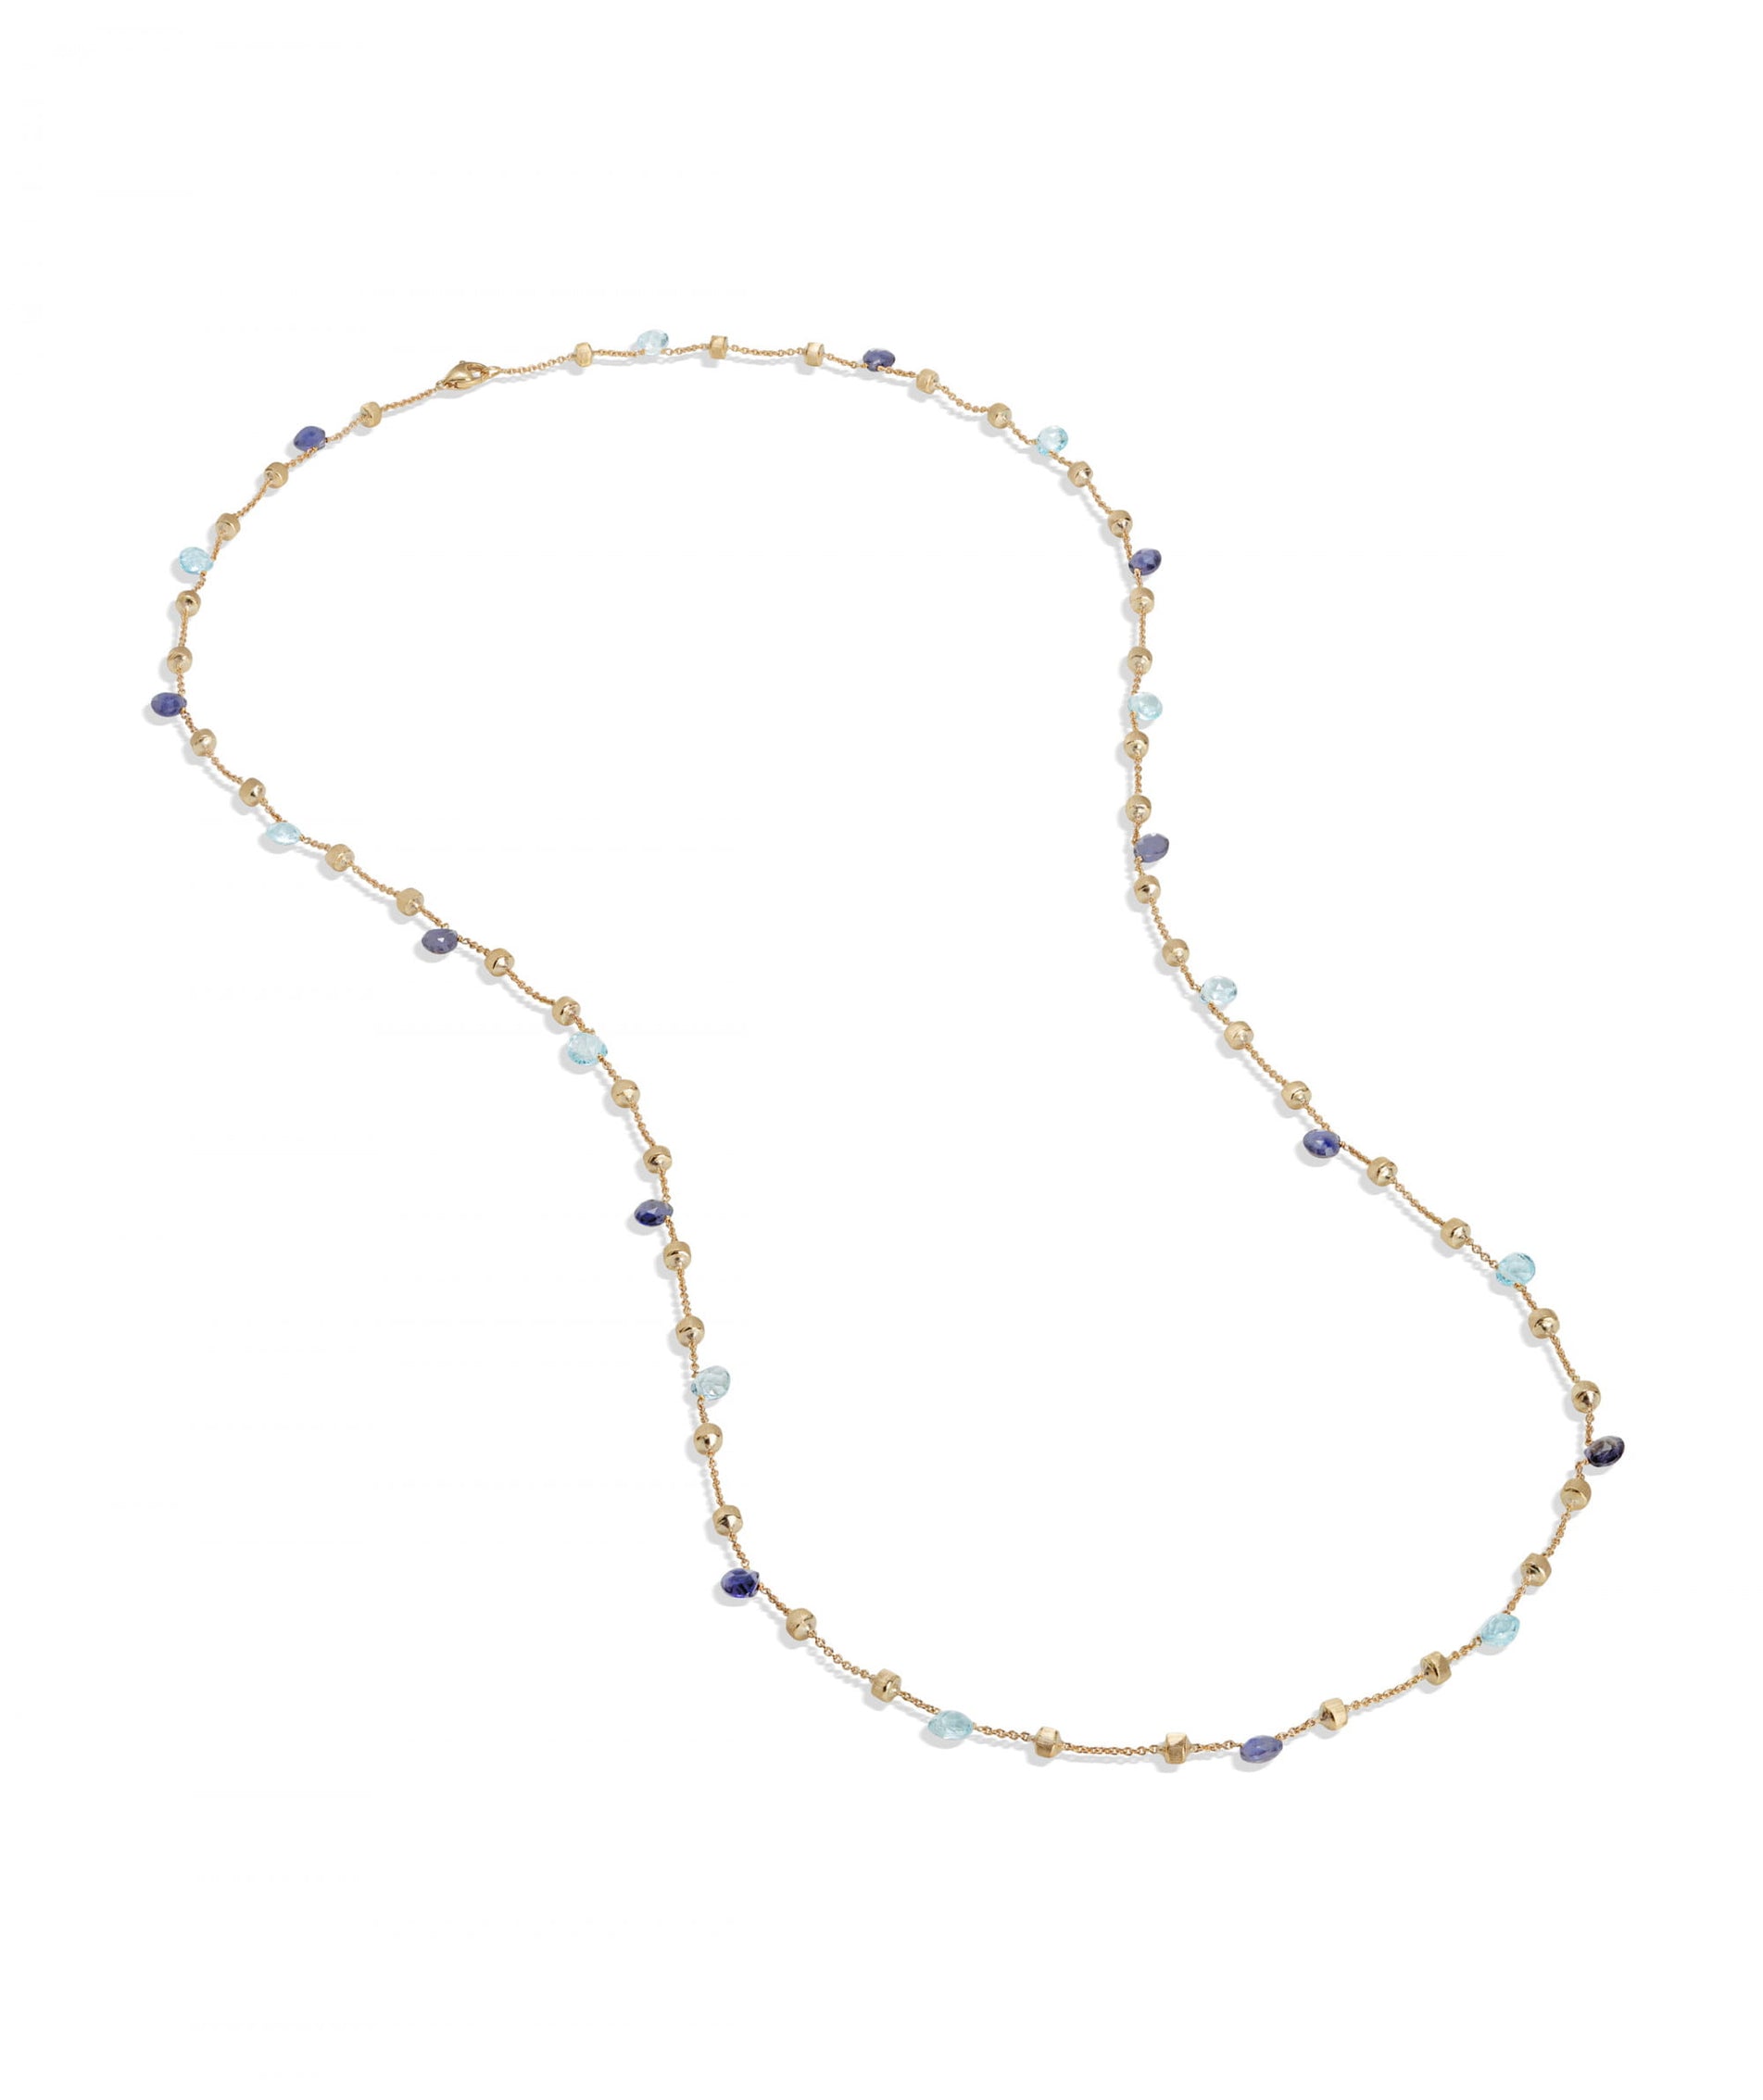 Paradise Necklace in 18k Yellow Gold with Iolite and Sky Blue Topaz - Orsini Jewellers NZ